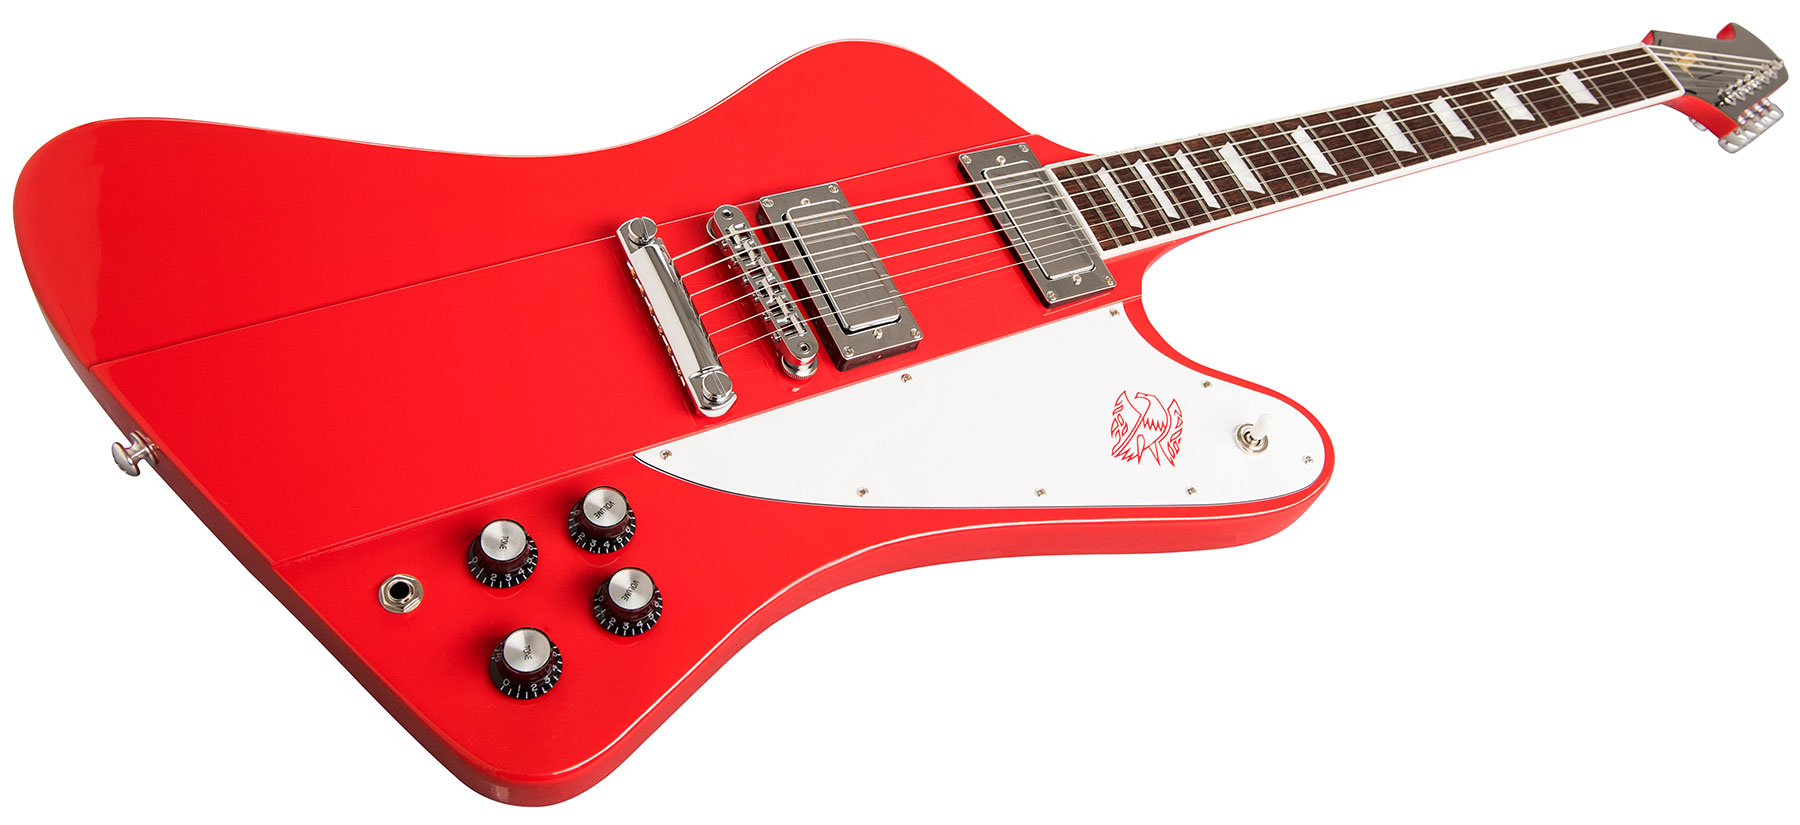 Gibson Firebird - cardinal red Solid body electric guitar red